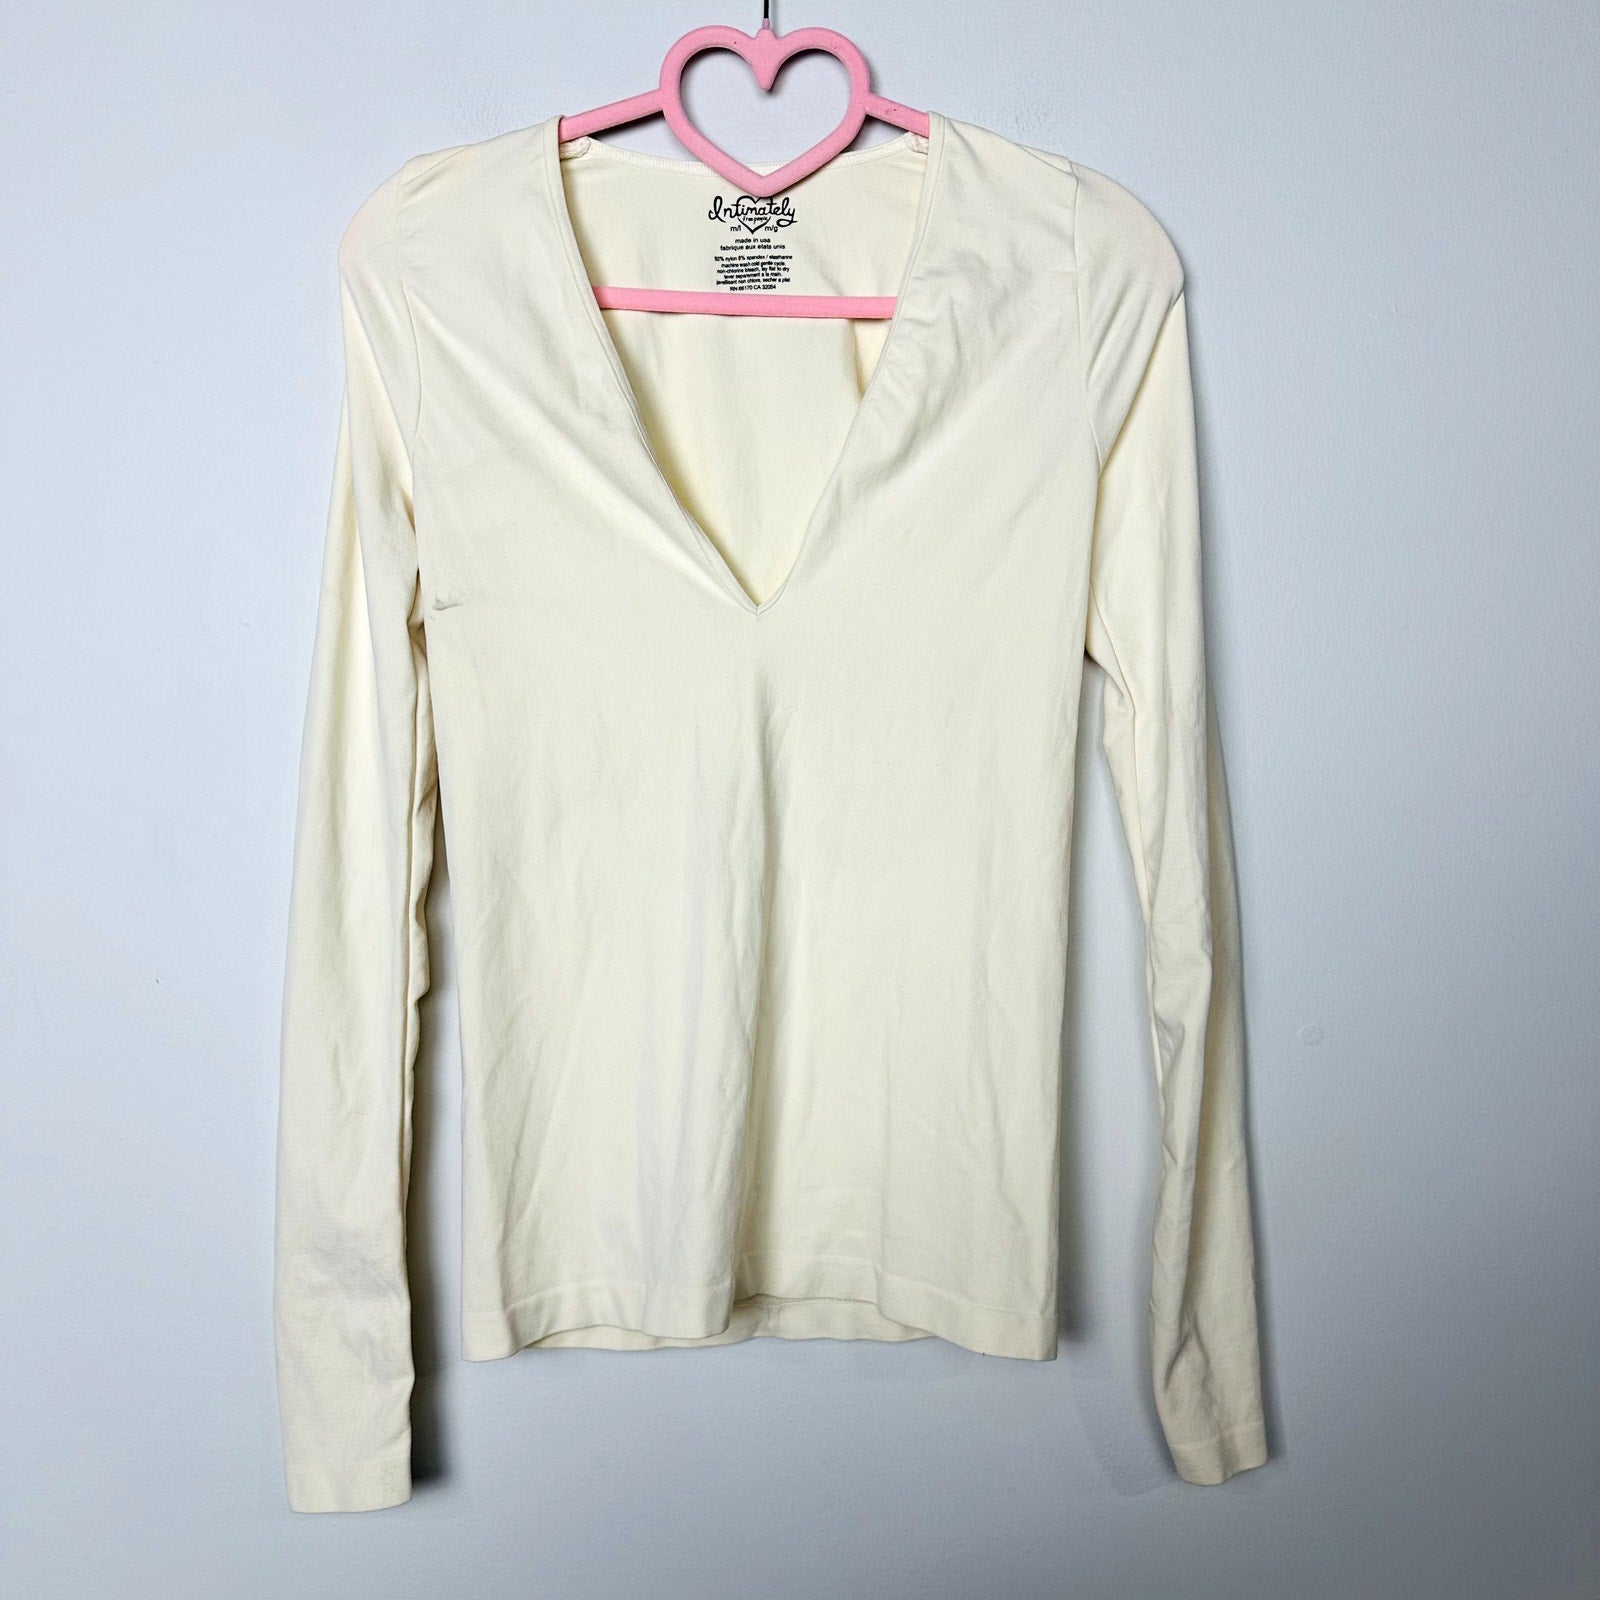 Free People Intimately NWOT Ivory Deep V-Neck Solid Long Sleeve Top Size M/L